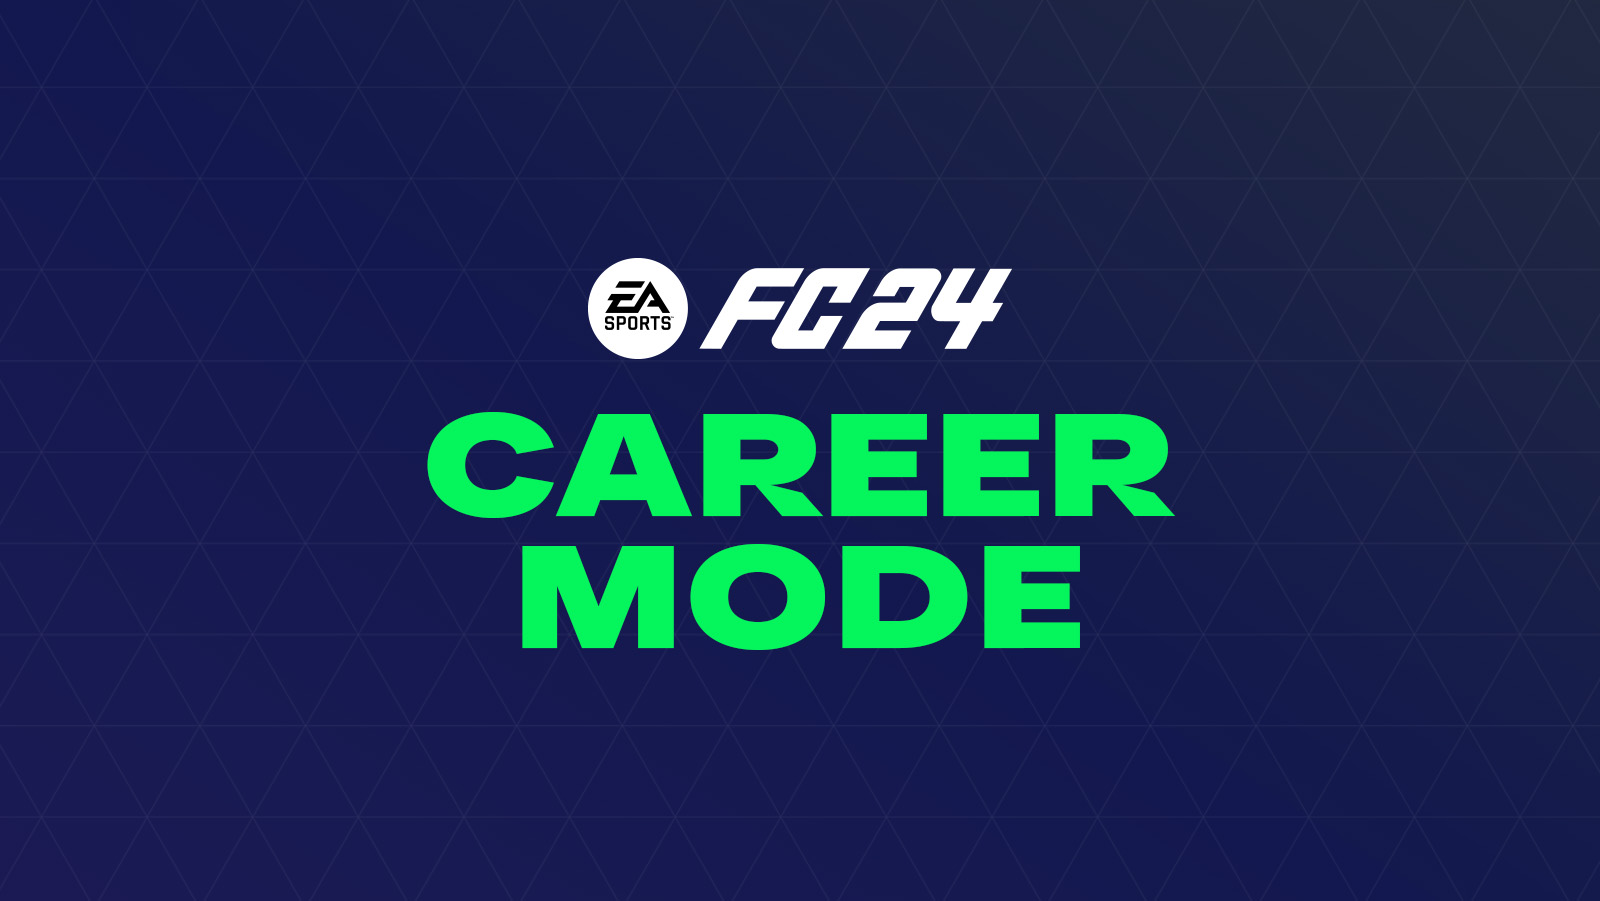 EA Sports Football Club Career Mode information, new features and details.